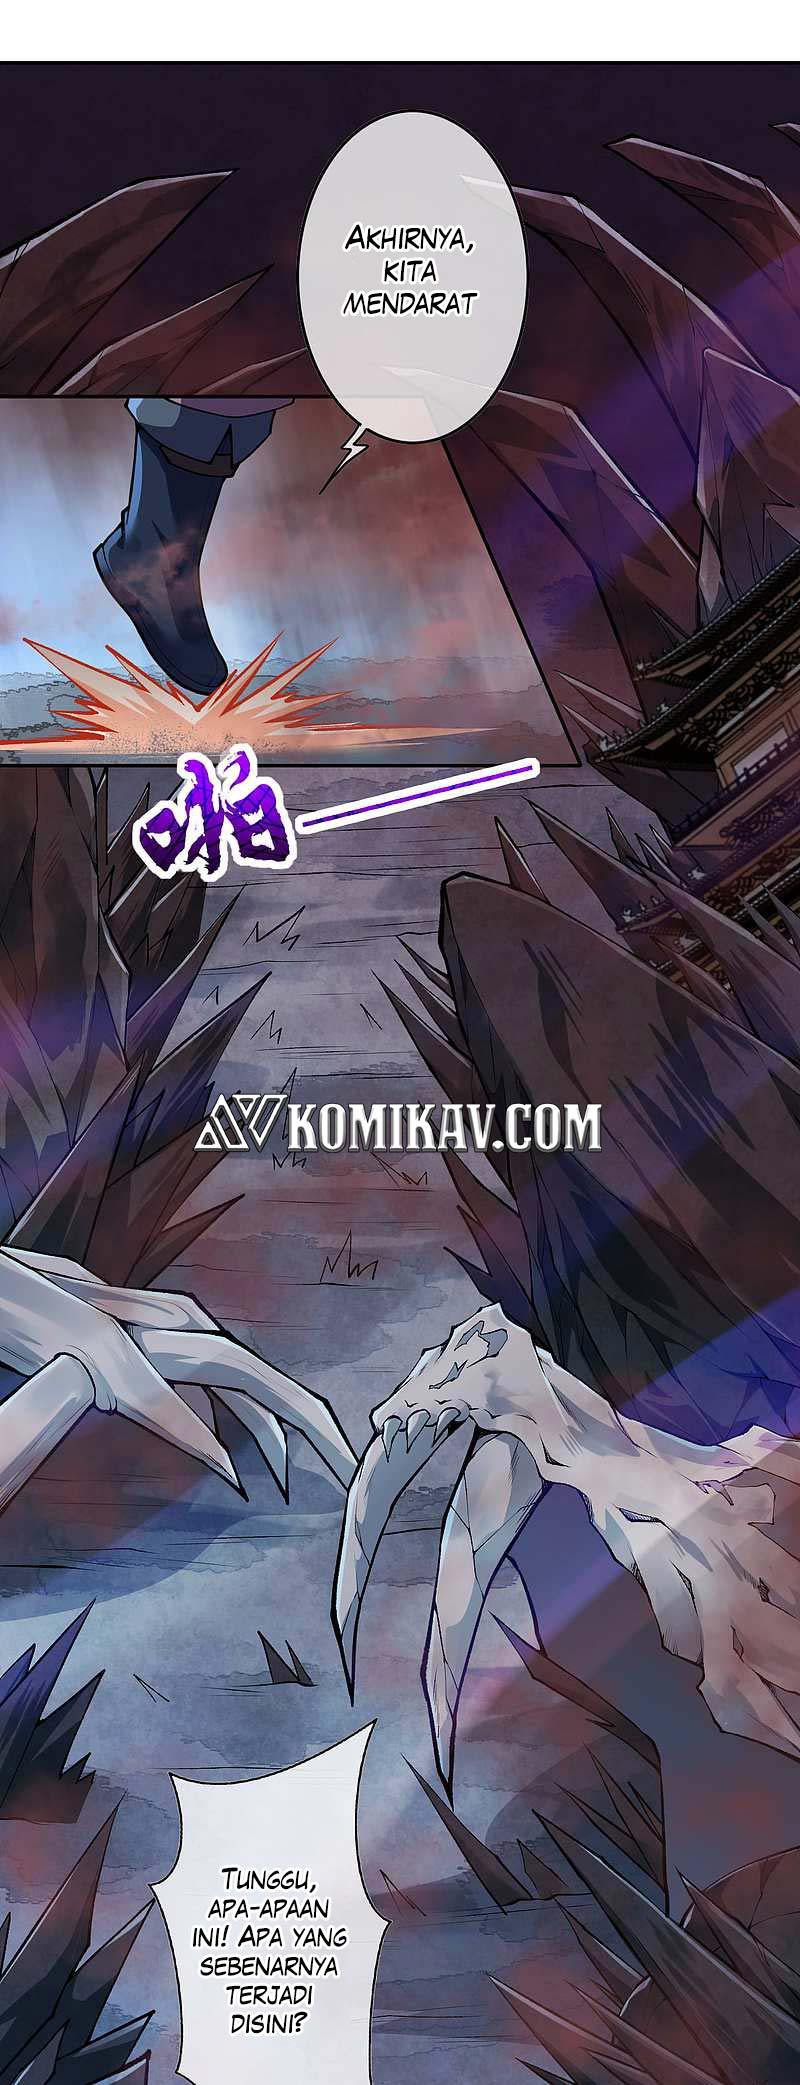 Invincible Sword Domain Chapter 40